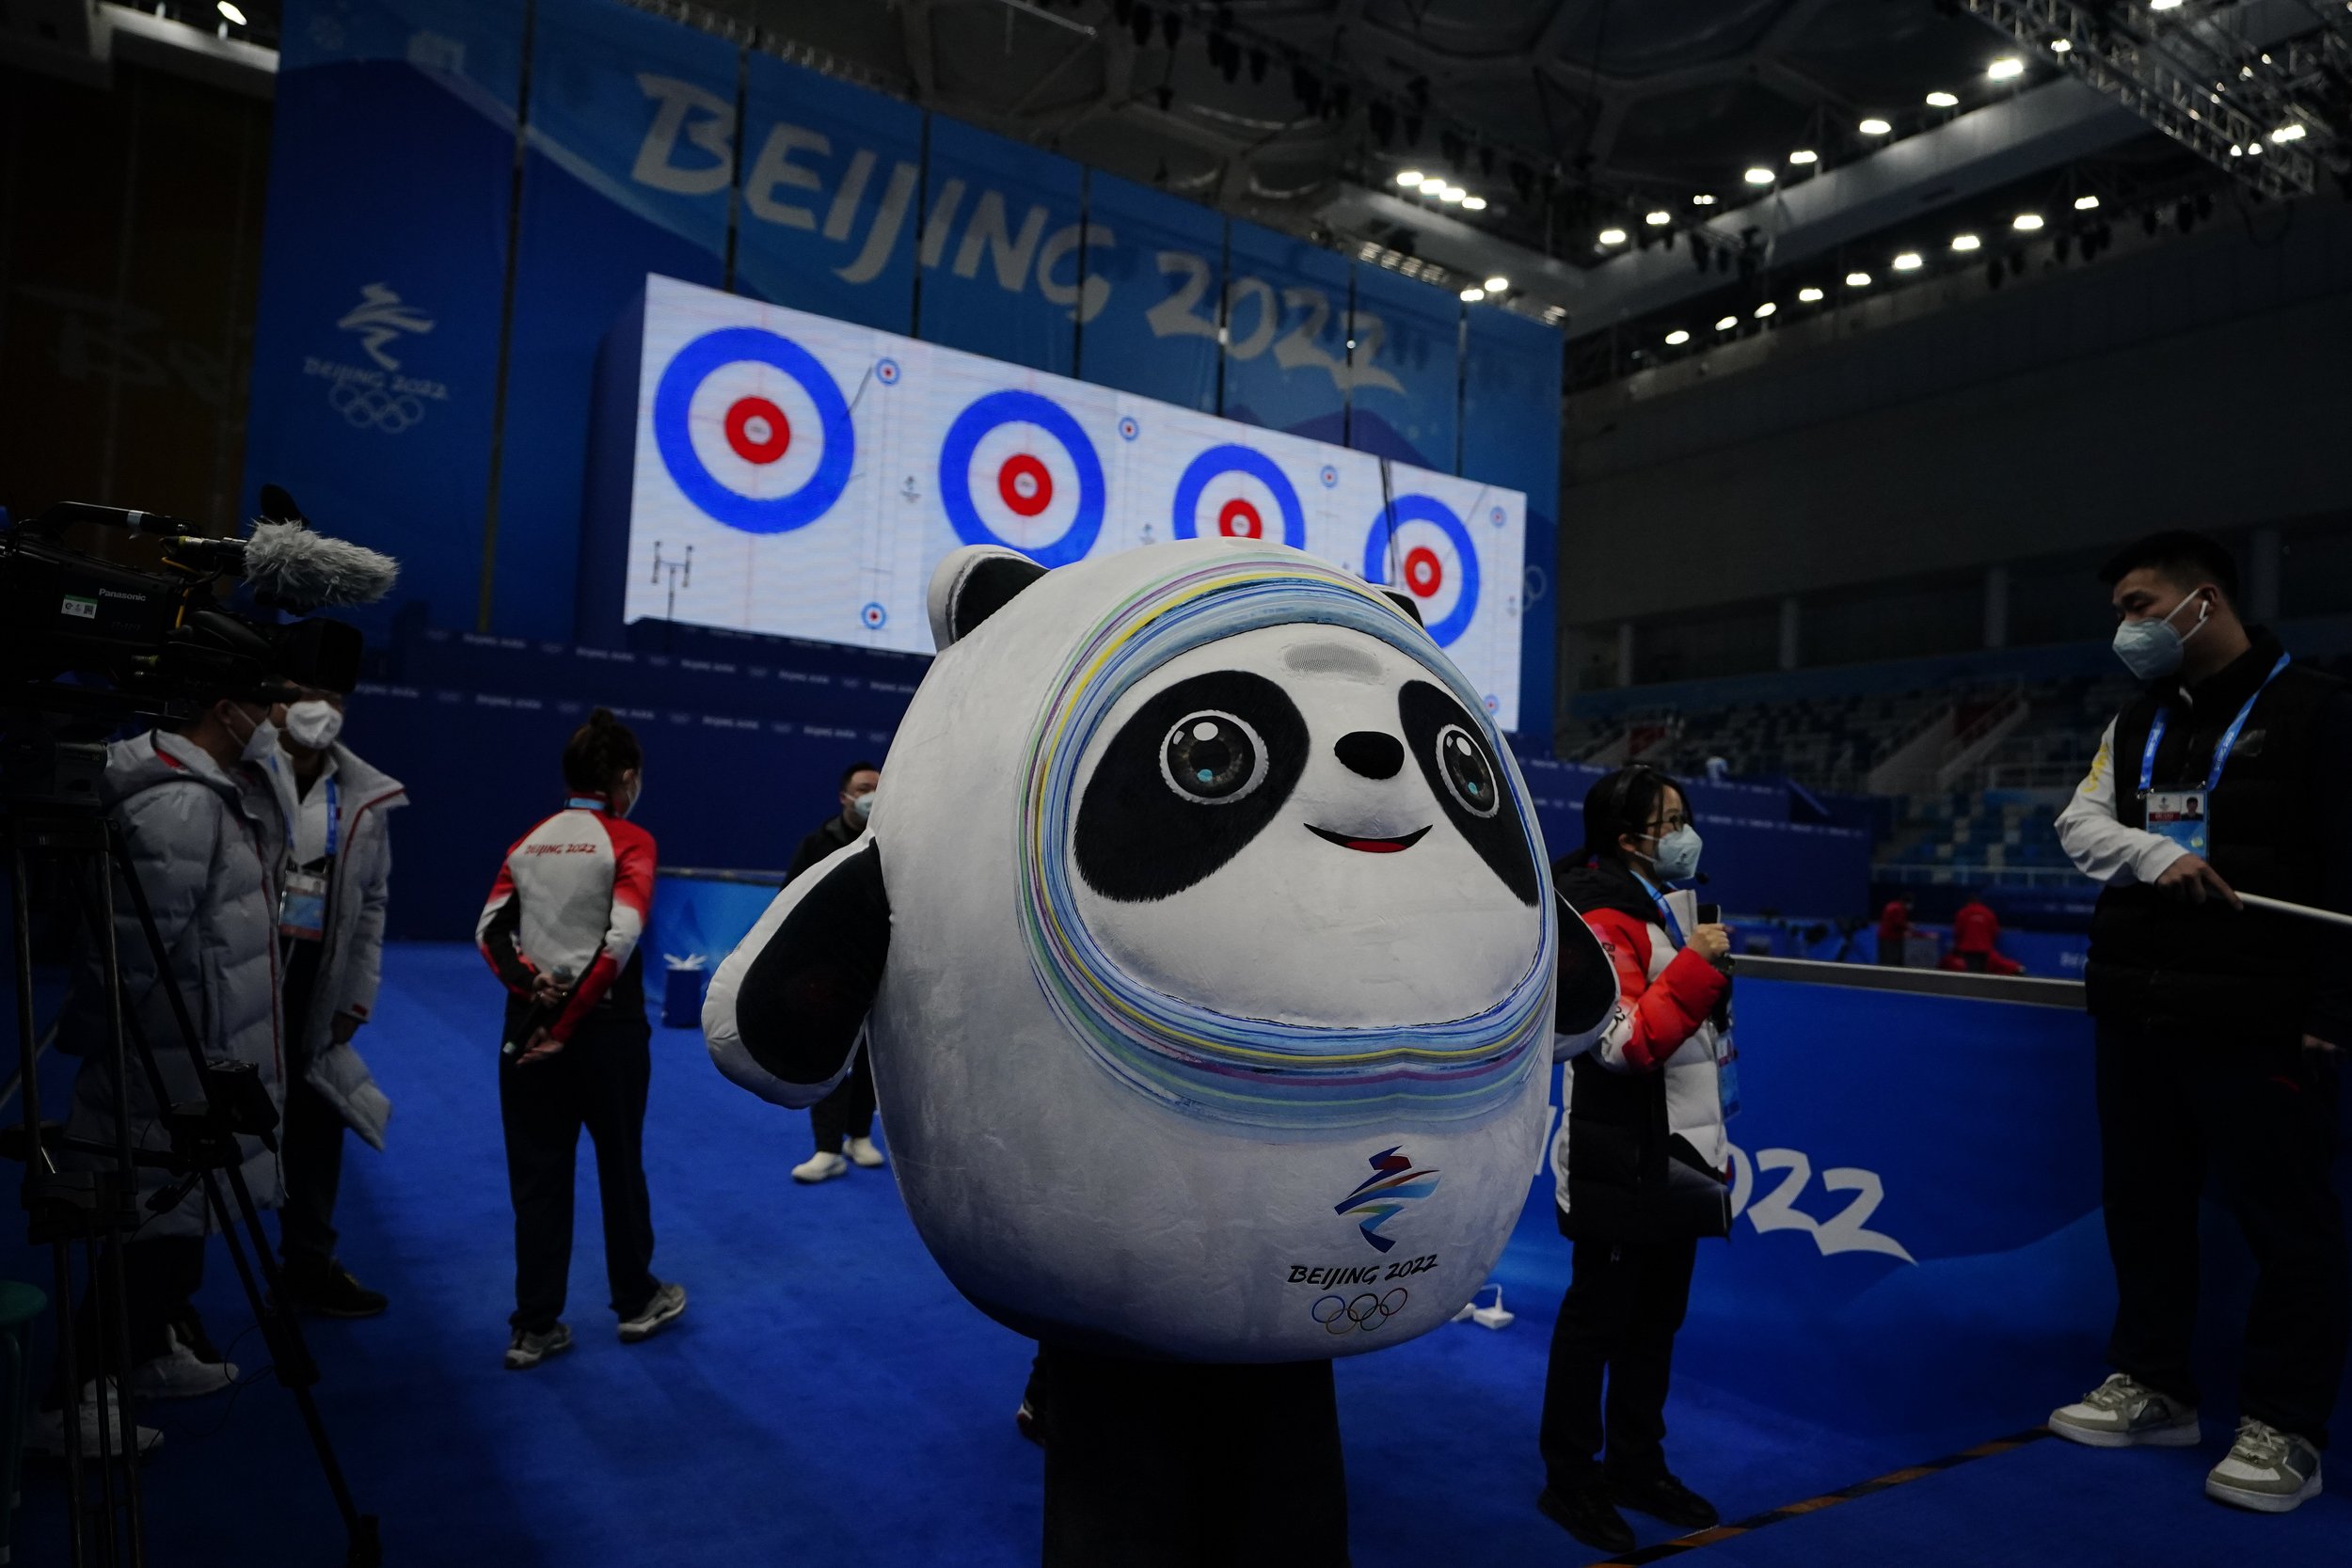  Bing Dwen Dwen, the Olympics mascot poses at the curling venue ahead of the Beijing Winter Olympics, Wednesday, Feb. 2, 2022, in Beijing. (AP Photo/Brynn Anderson) 